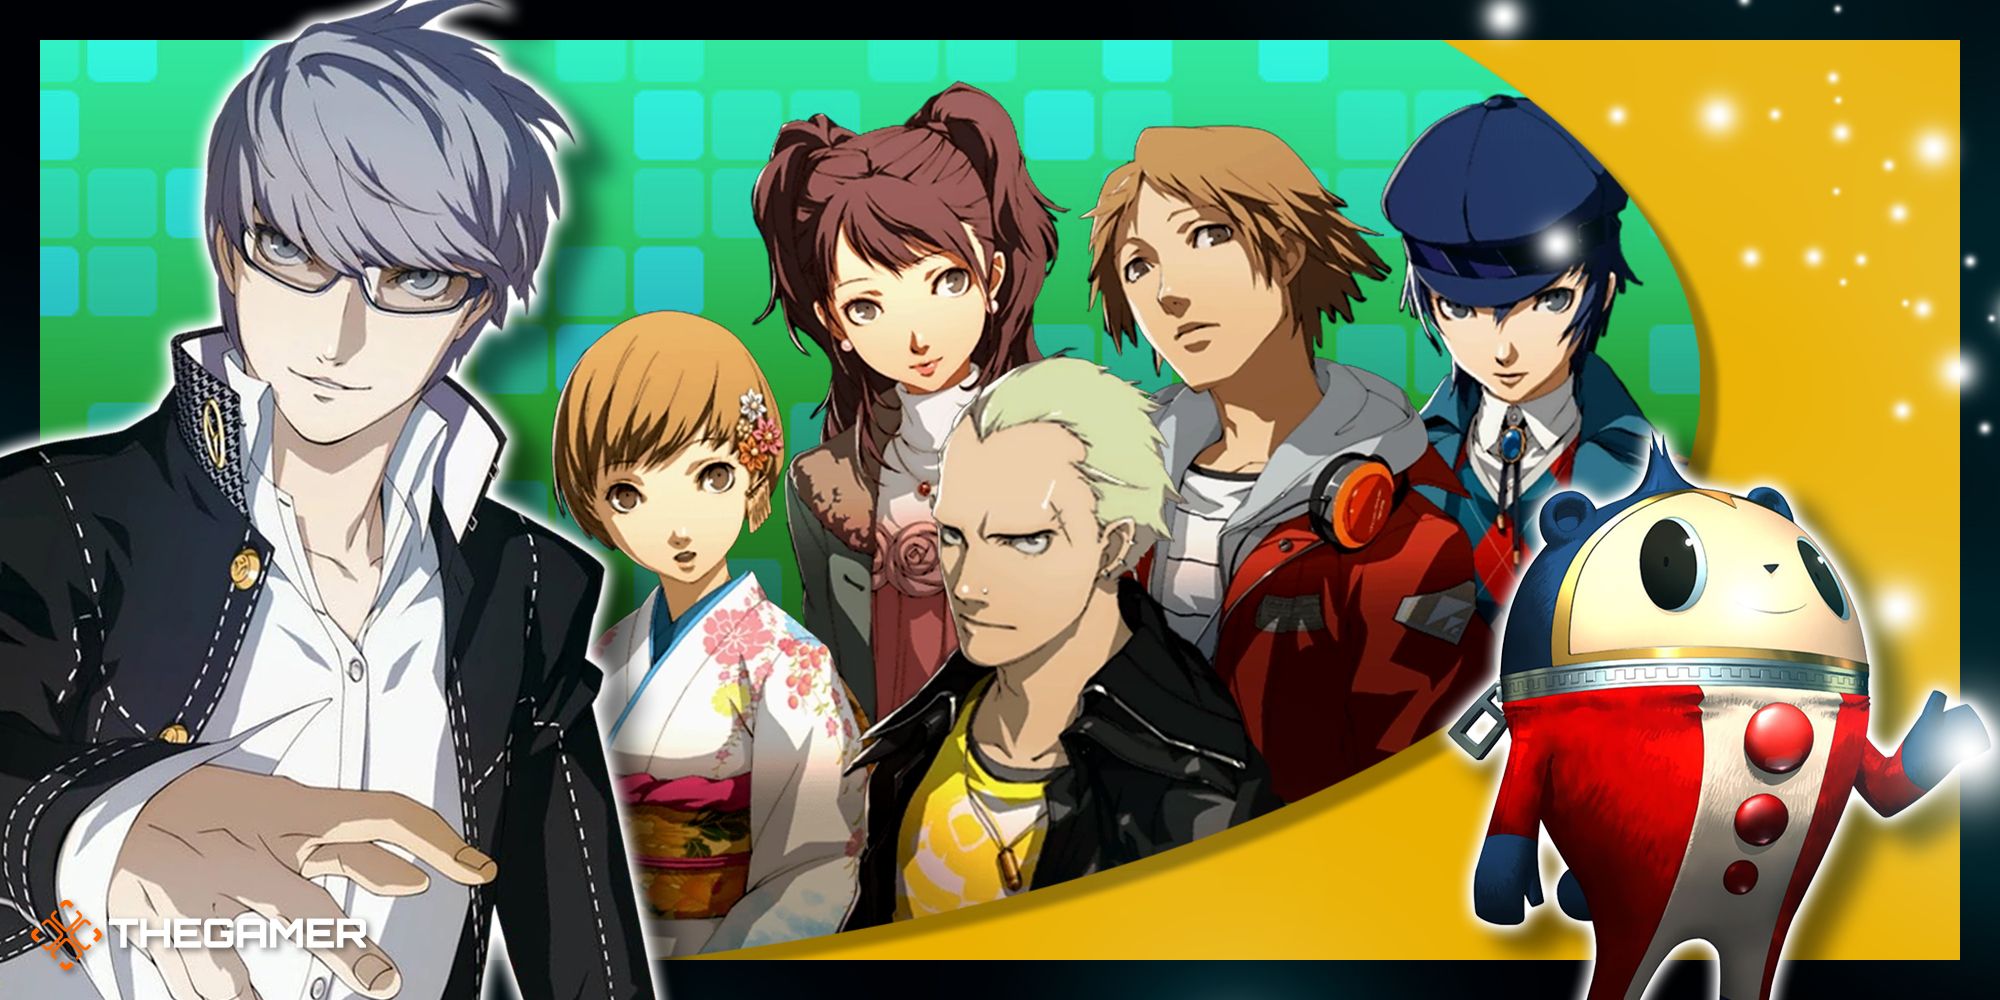 How To Rank Up Your Judgement Social Link In Persona 4 Golden